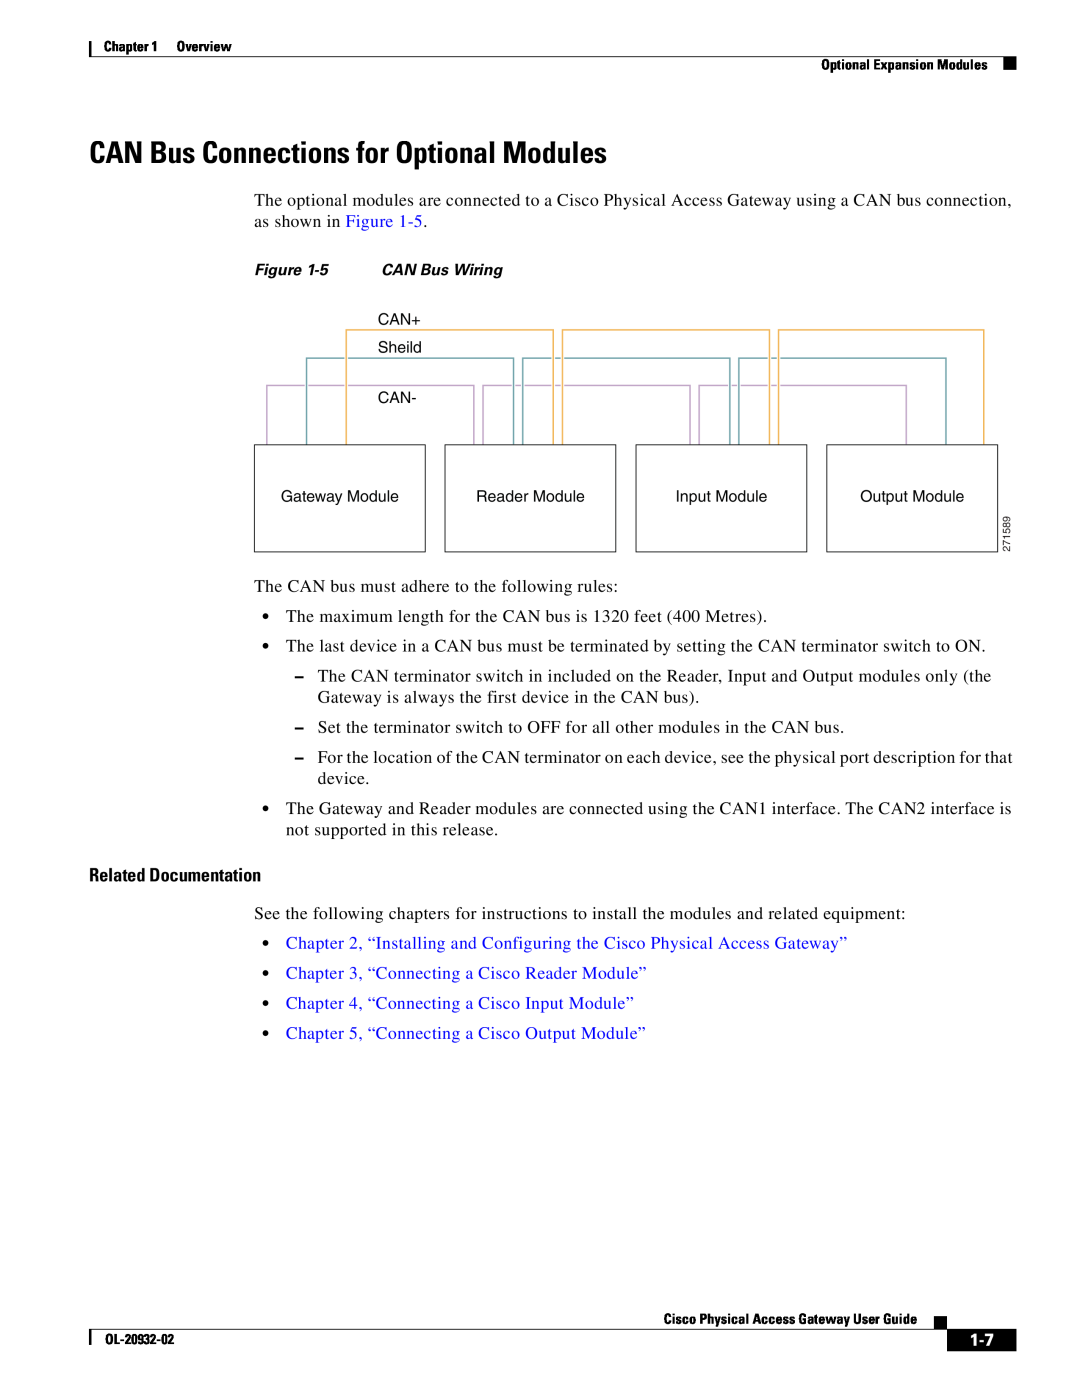 Cisco Systems OL-20932-02 manual CAN Bus Connections for Optional Modules, “Connecting a Cisco Reader Module” 